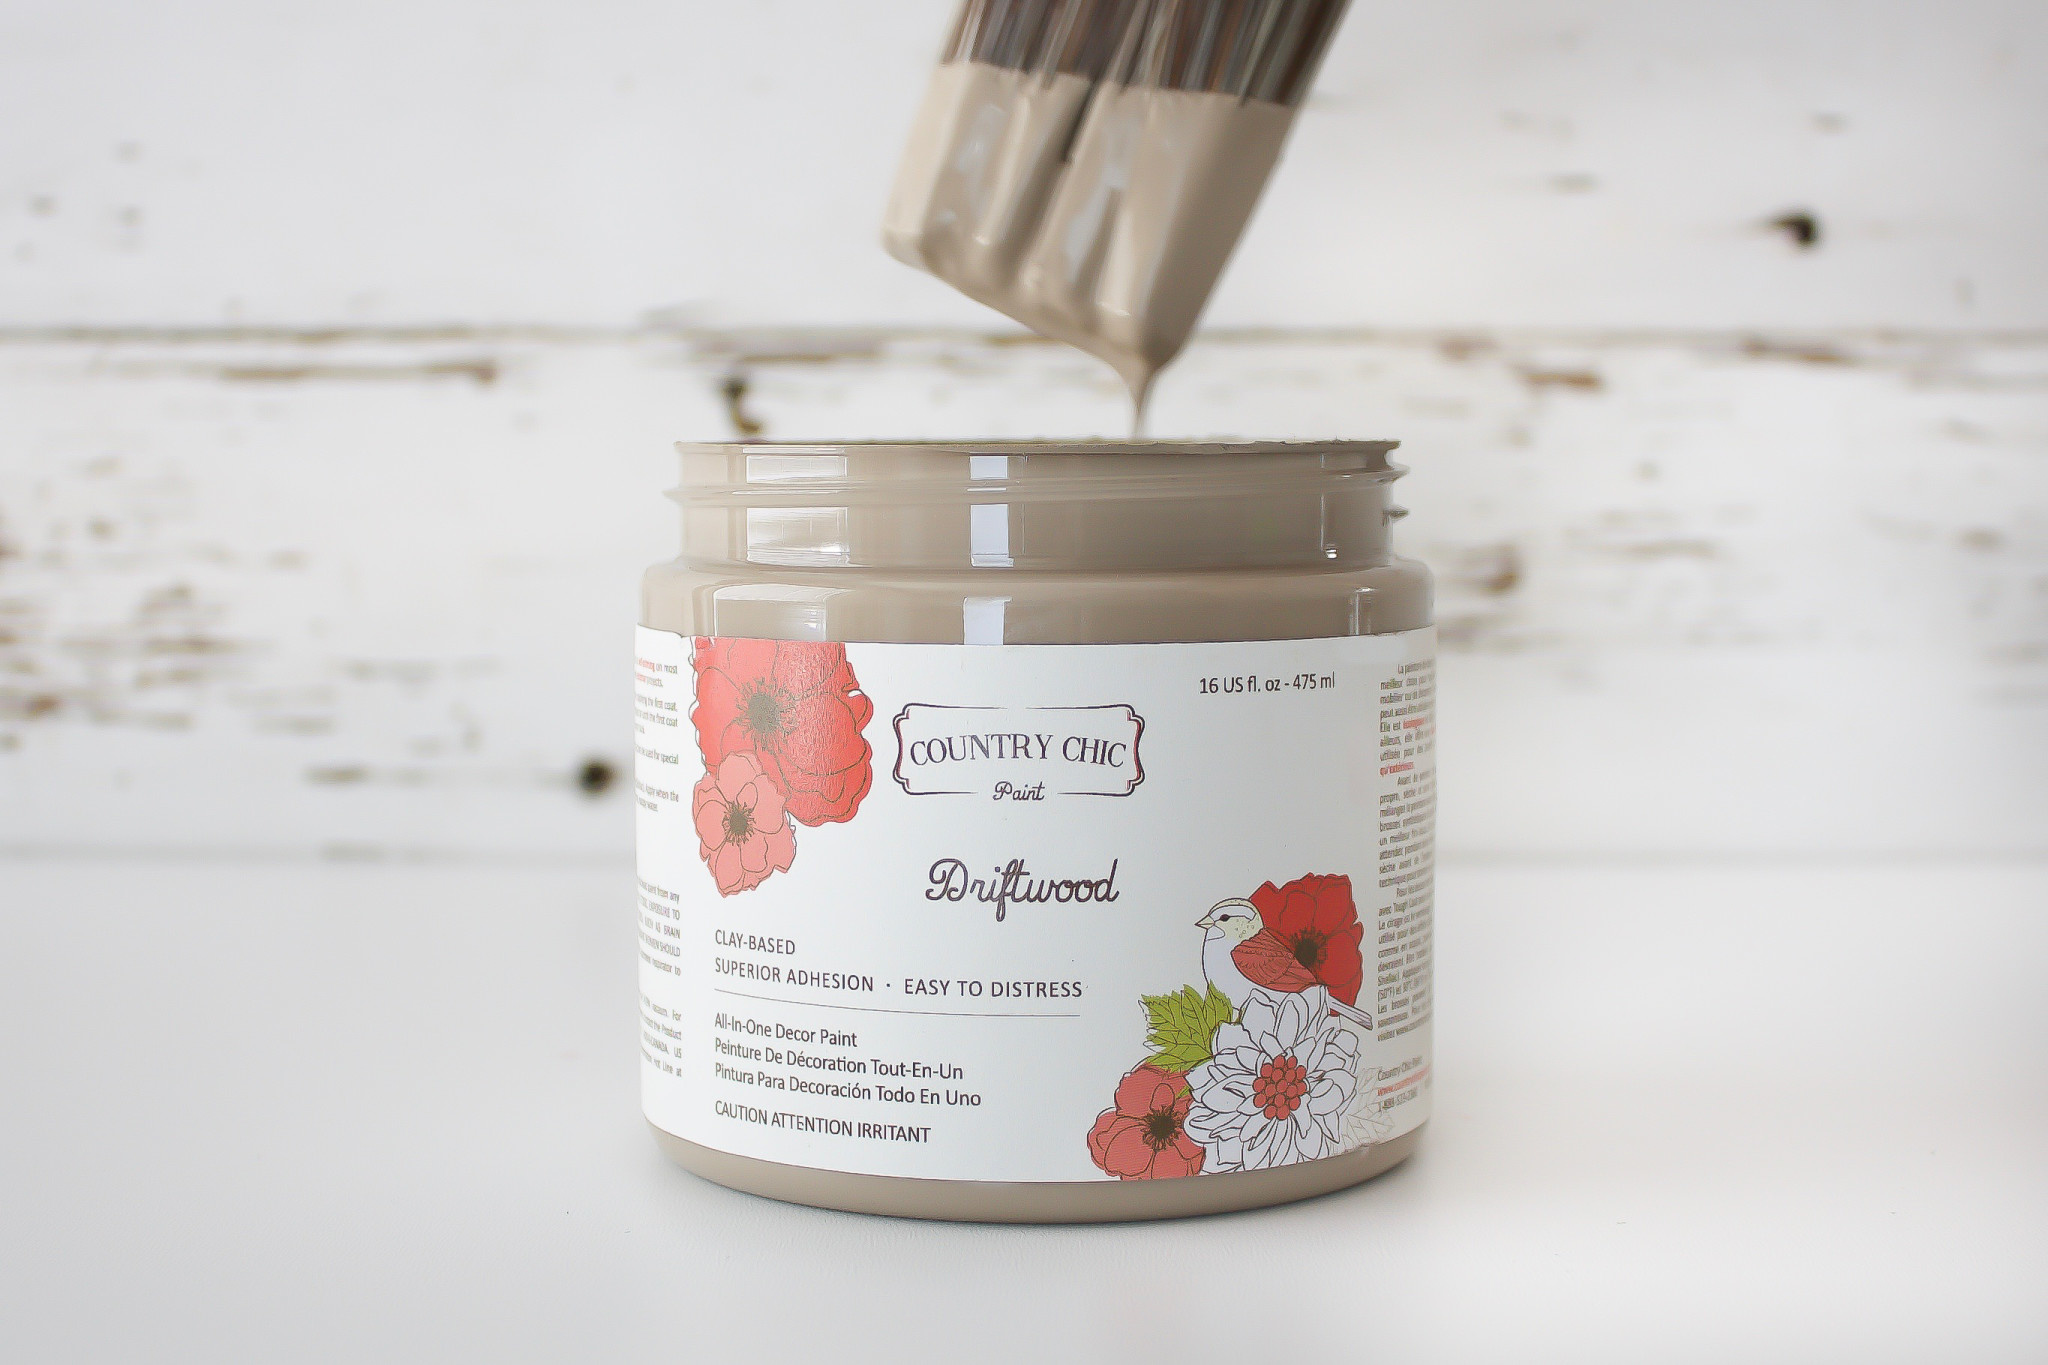 Country Chic Country Chic Paint Sample - 4oz Driftwood